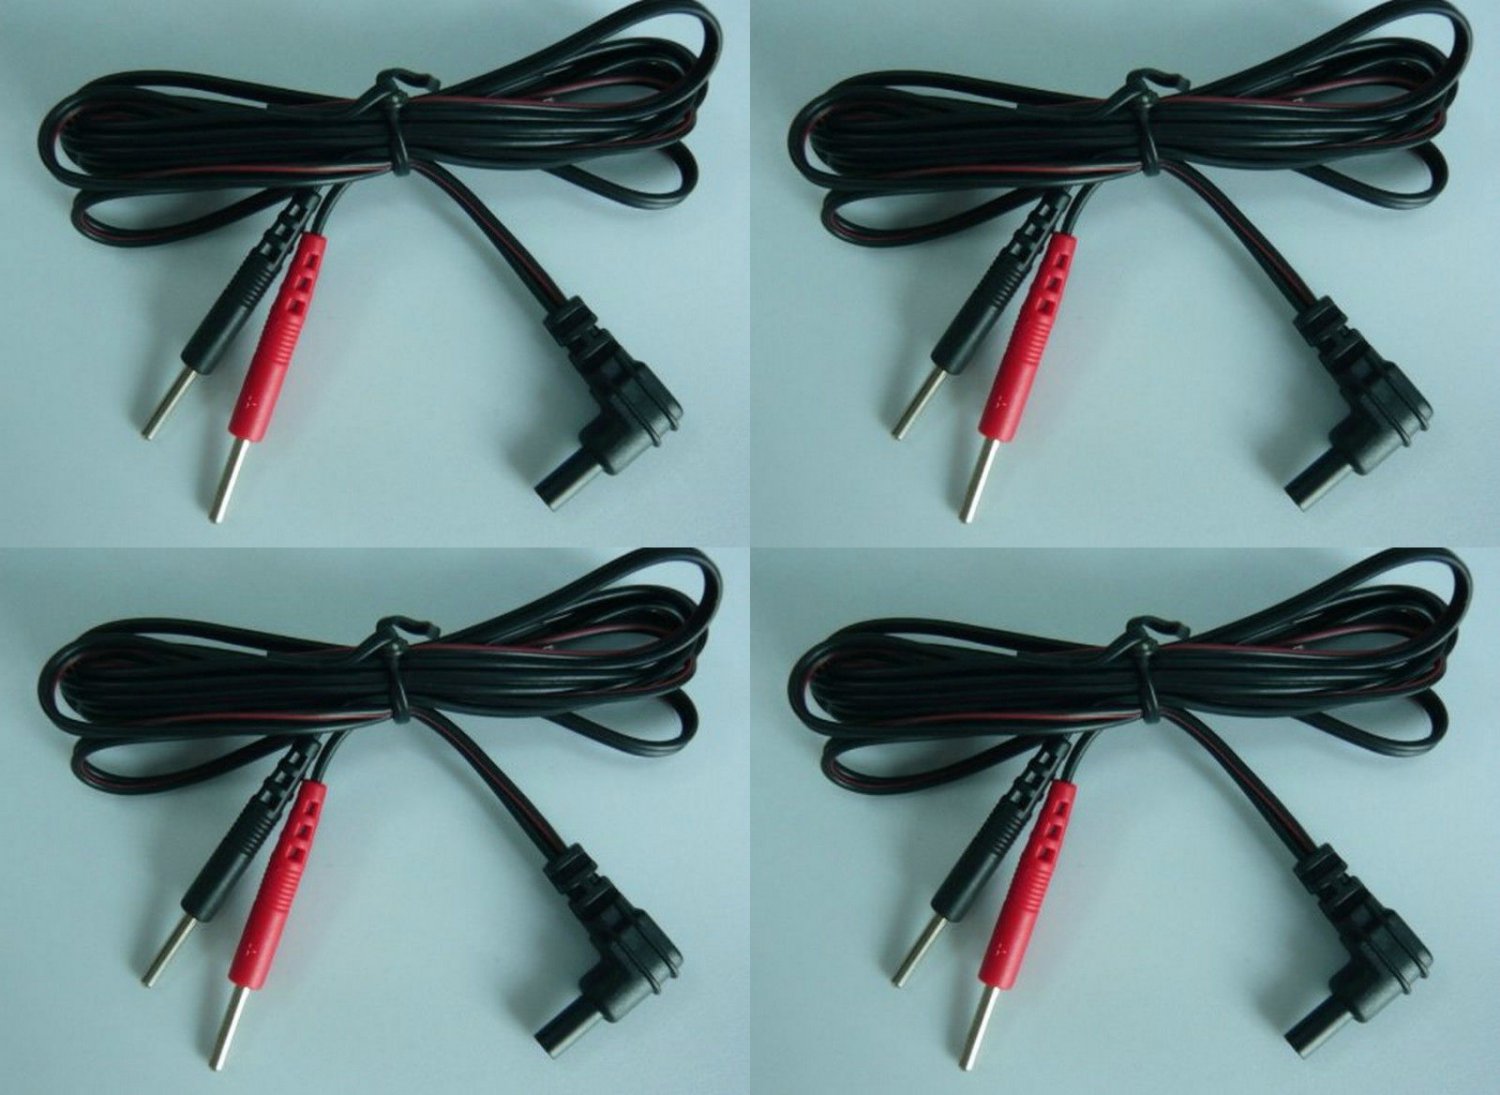 4 Tens Unit Lead Wires With Pin Connectors 45 4 Ea